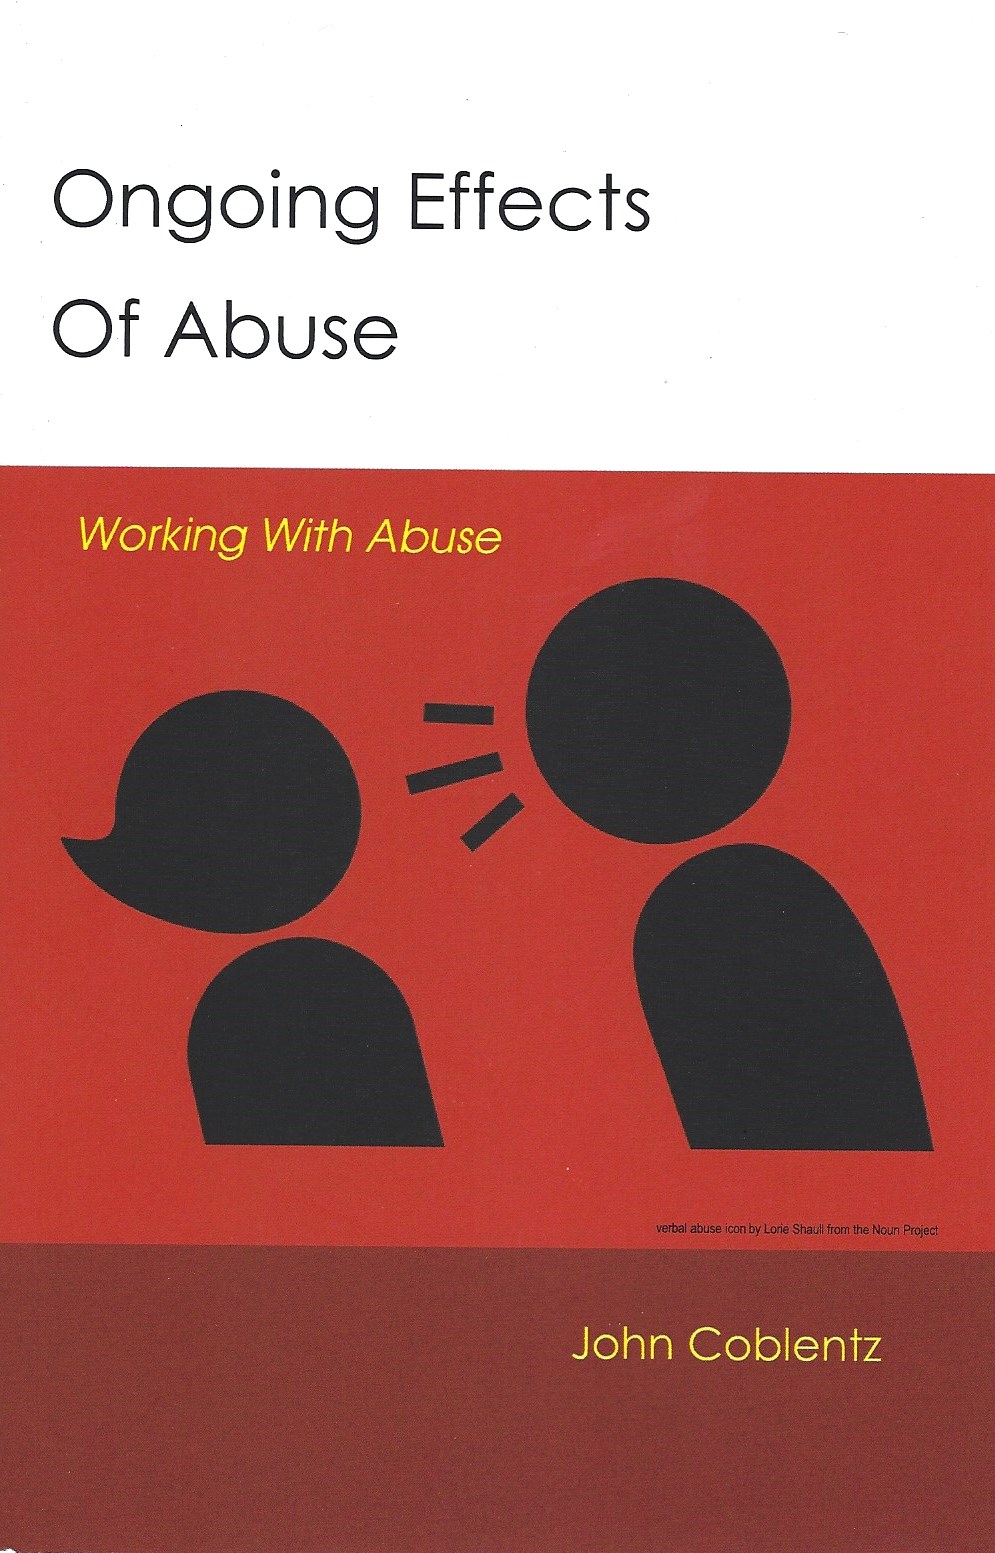 ONGOING EFFECTS OF ABUSE John Coblentz - Click Image to Close